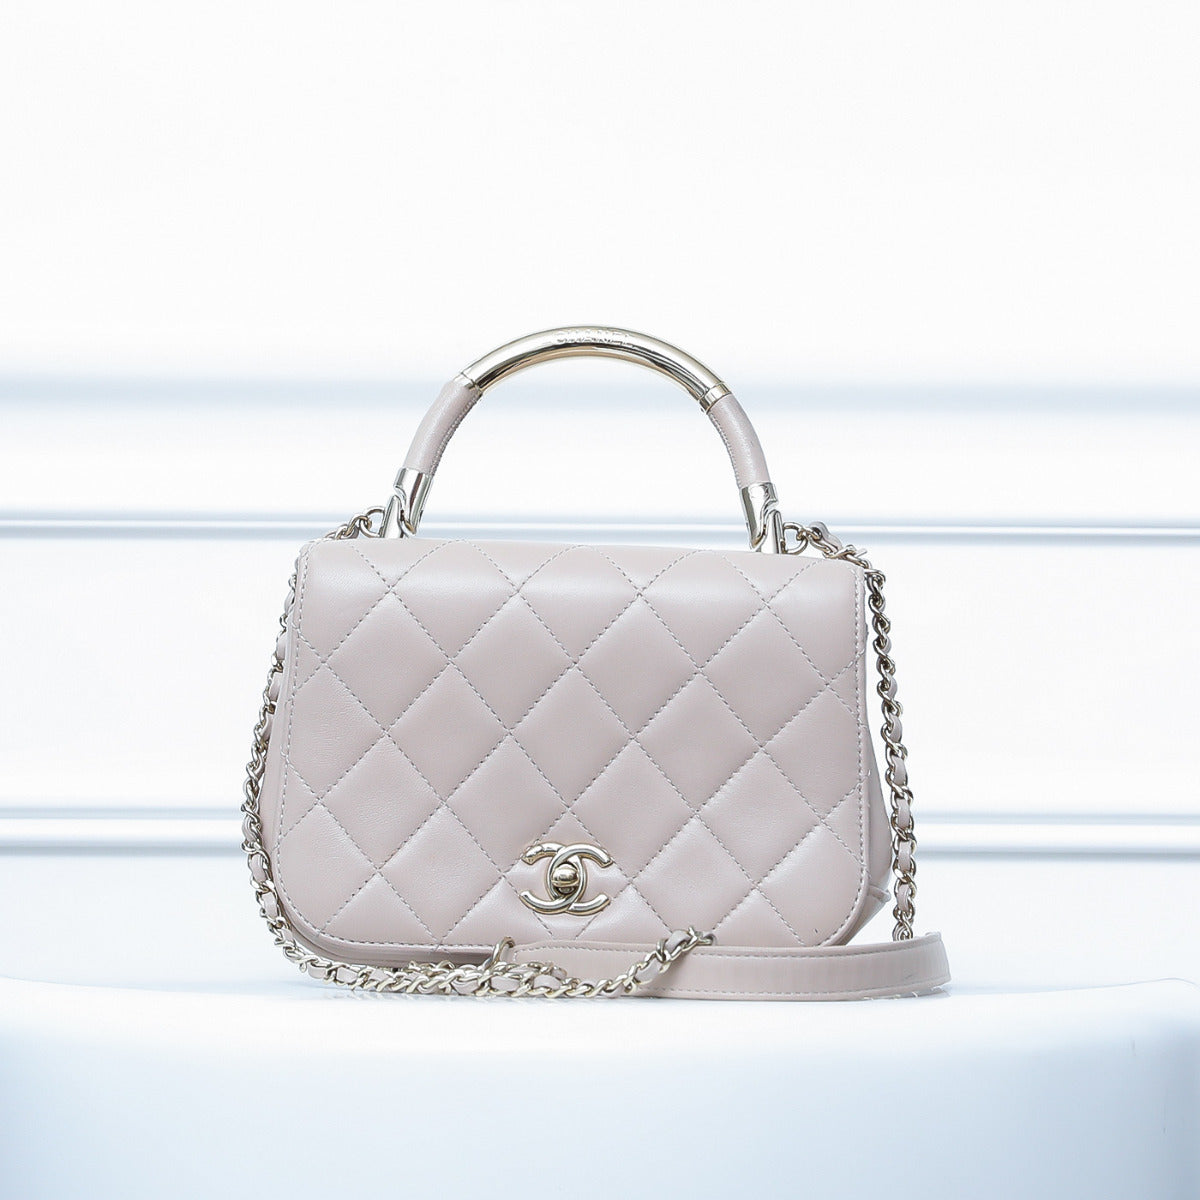 Chanel Carry Chic Flap Bag